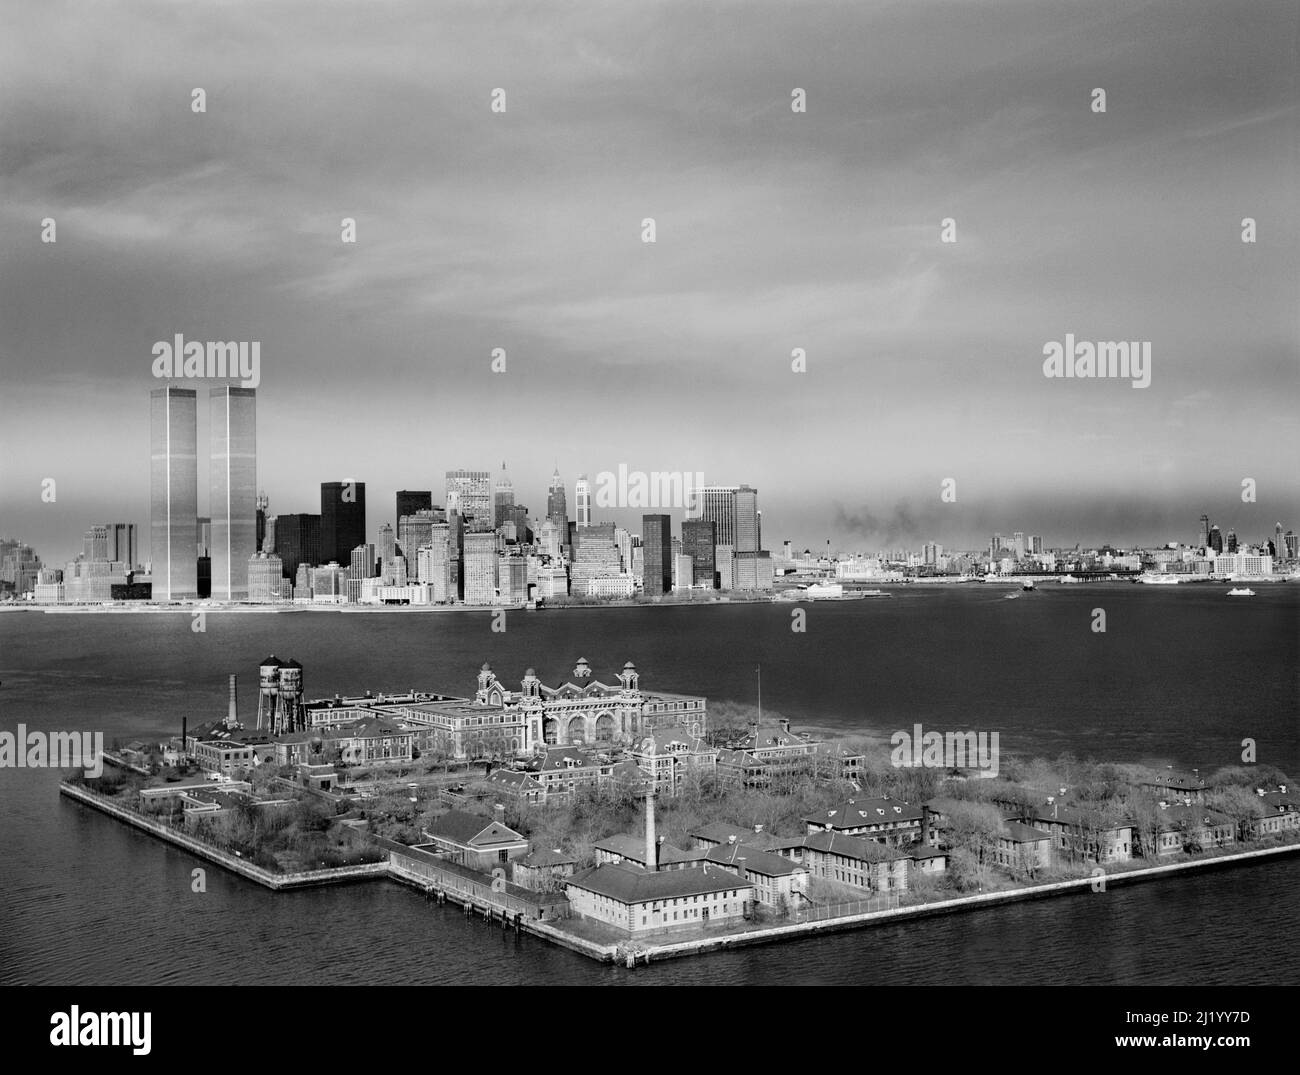 Ellis Island with Manhattan Skyline in background, World Trade Center Towers to left, New York City, New York, USA, Historic American Buildings Survey Collection, 1970's Stock Photo